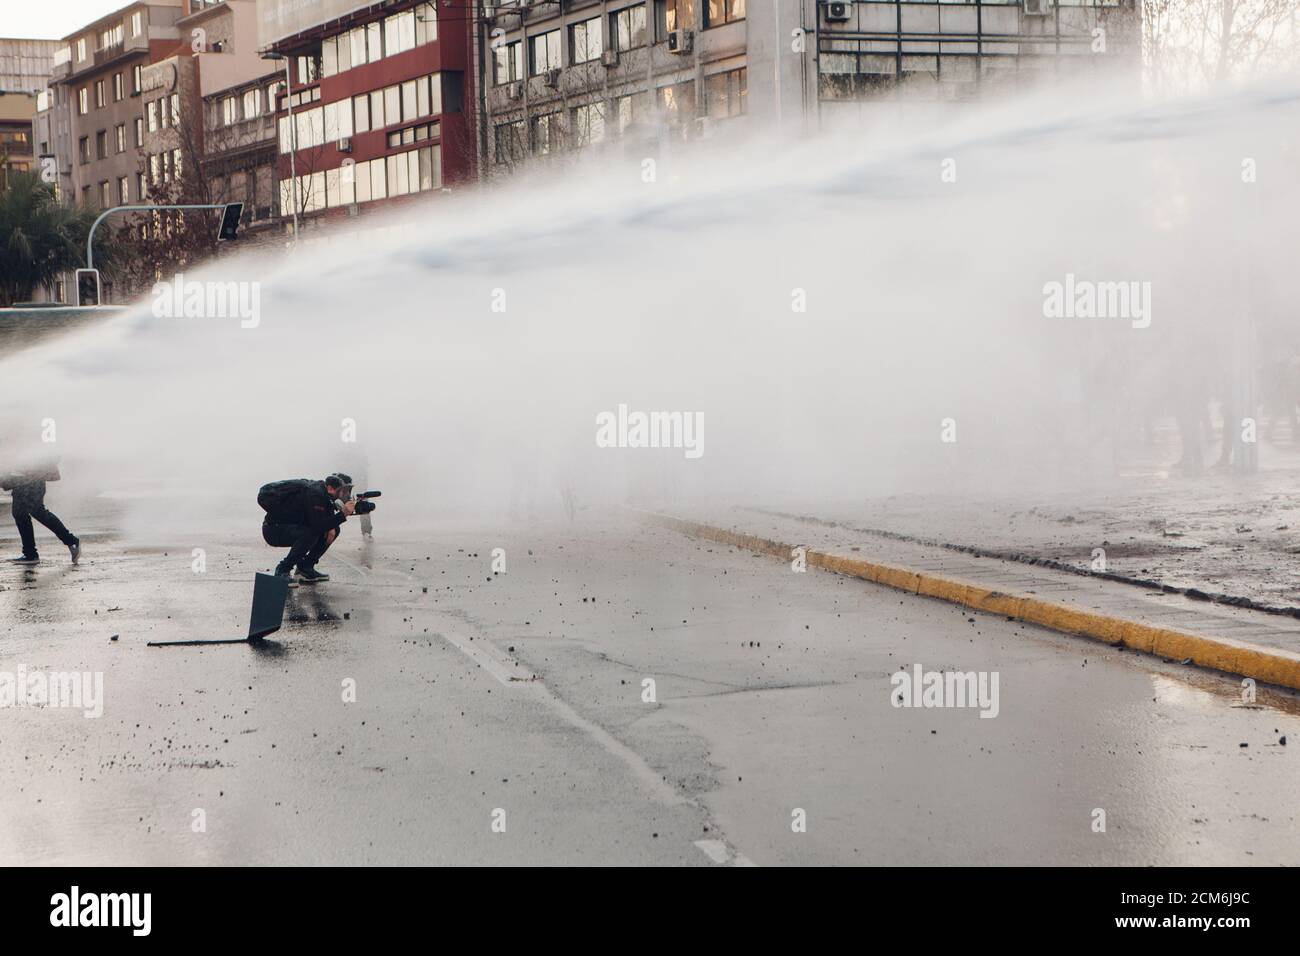 SANTIAGO, CHILE - SEPTEMBER 11, 2020 - A police water cannon disperses protesters against Sebastian Pinera's government. Hundreds of people came to th Stock Photo